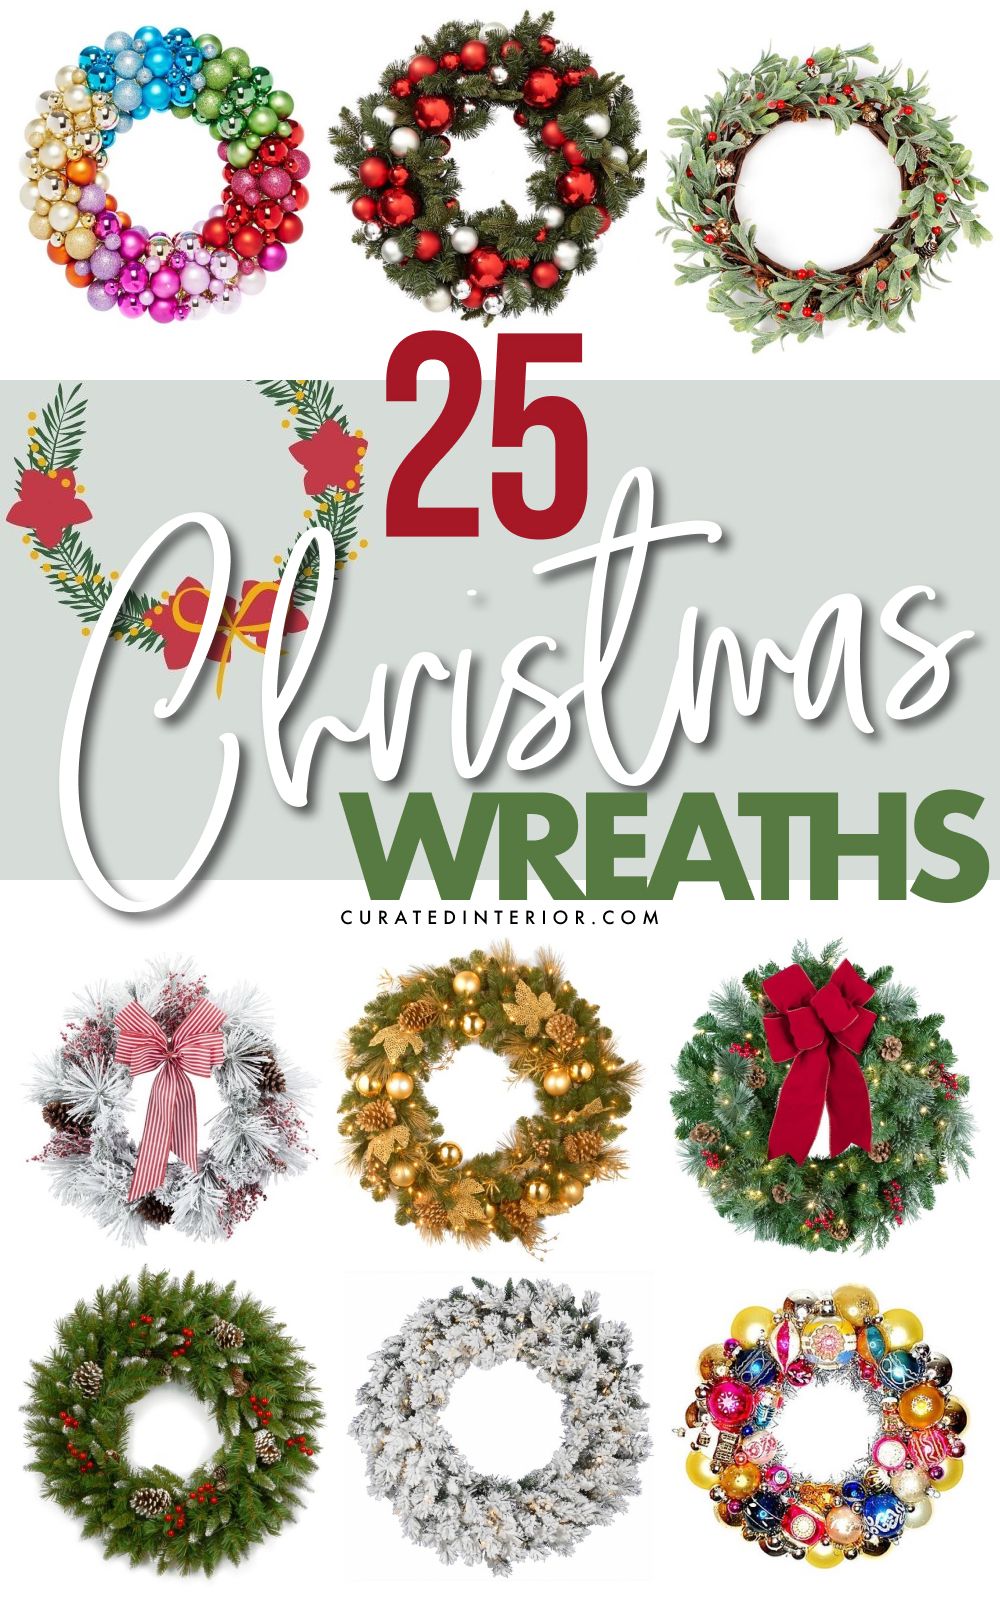 25 Amazing Christmas Wreaths for the Holidays